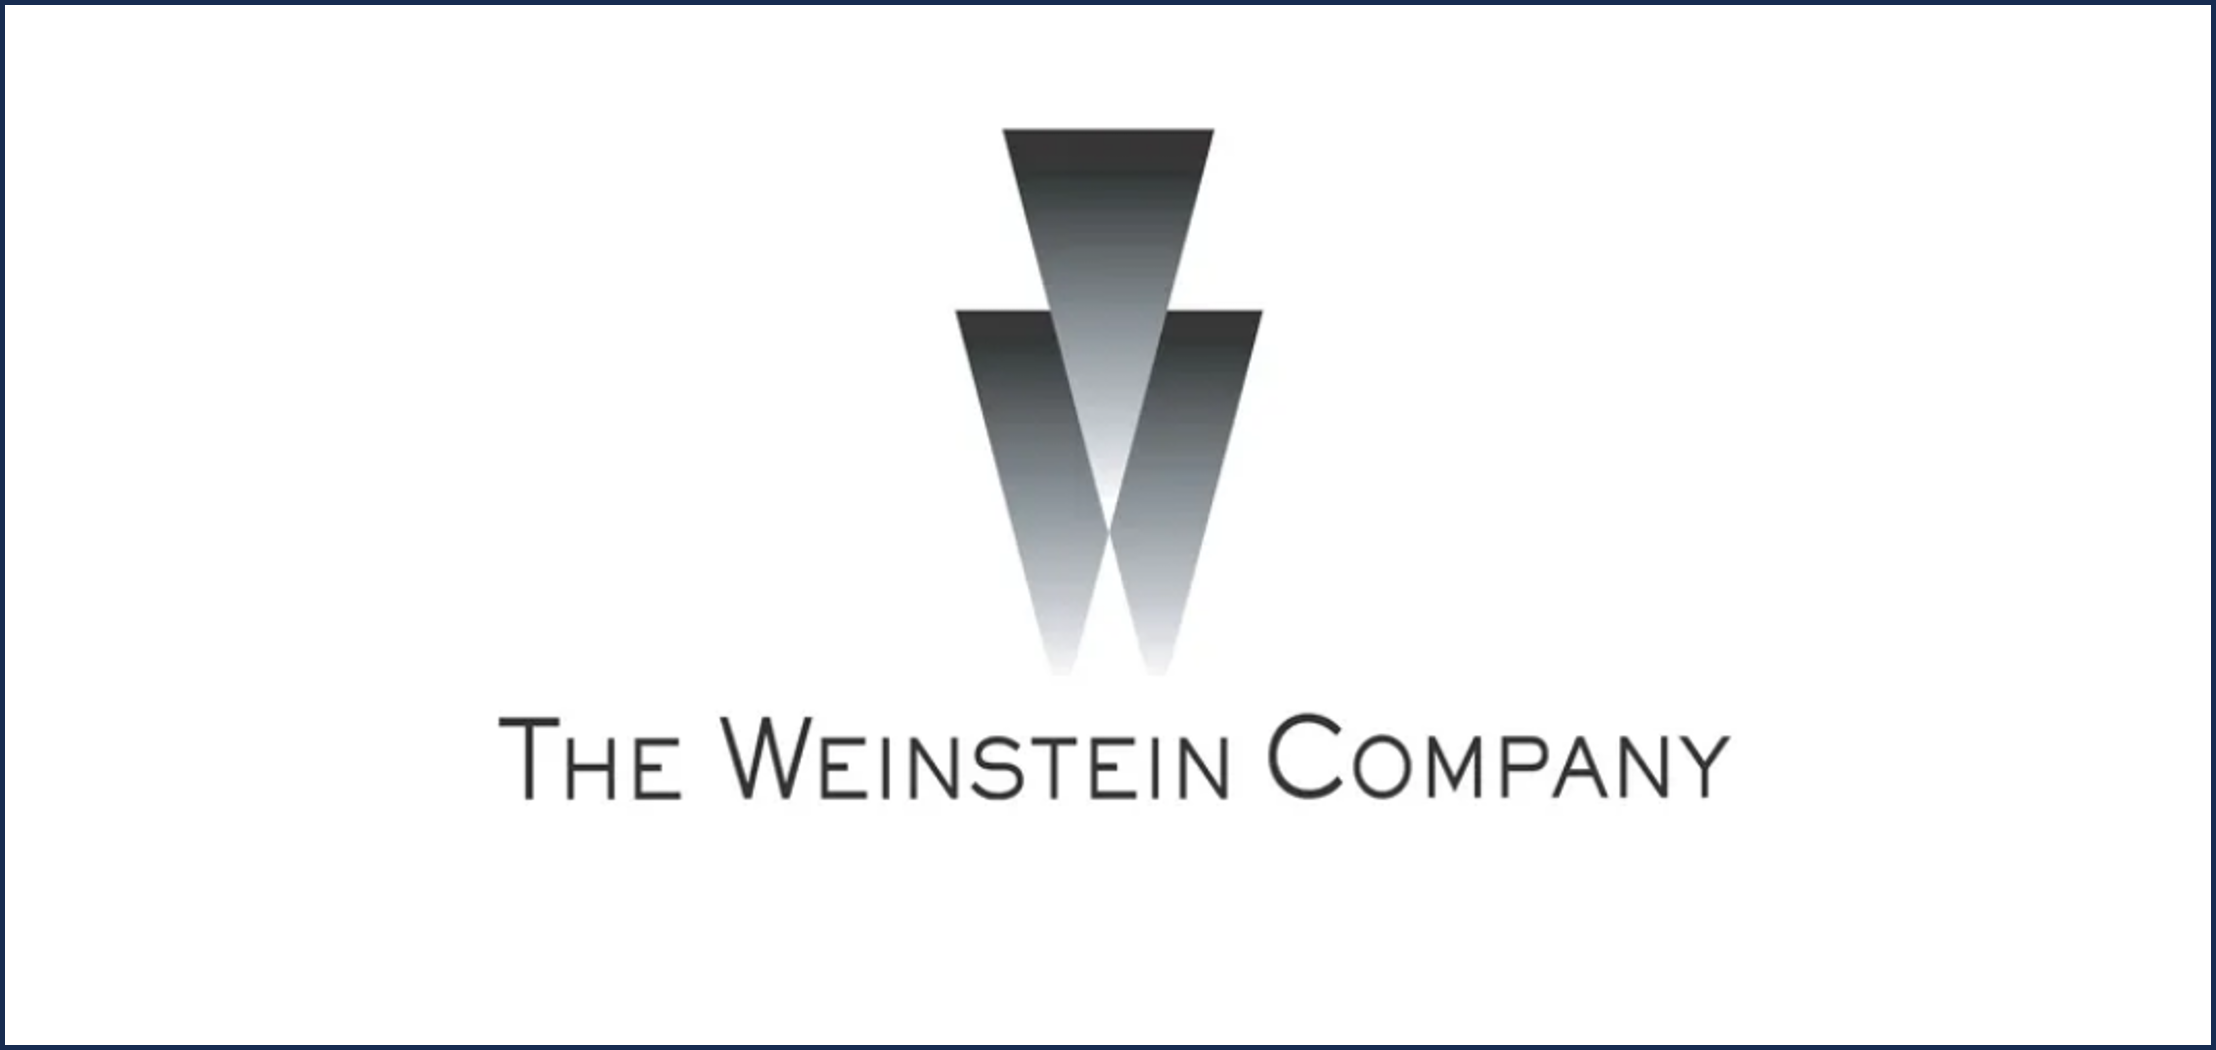 The Weinstein Company logo for web